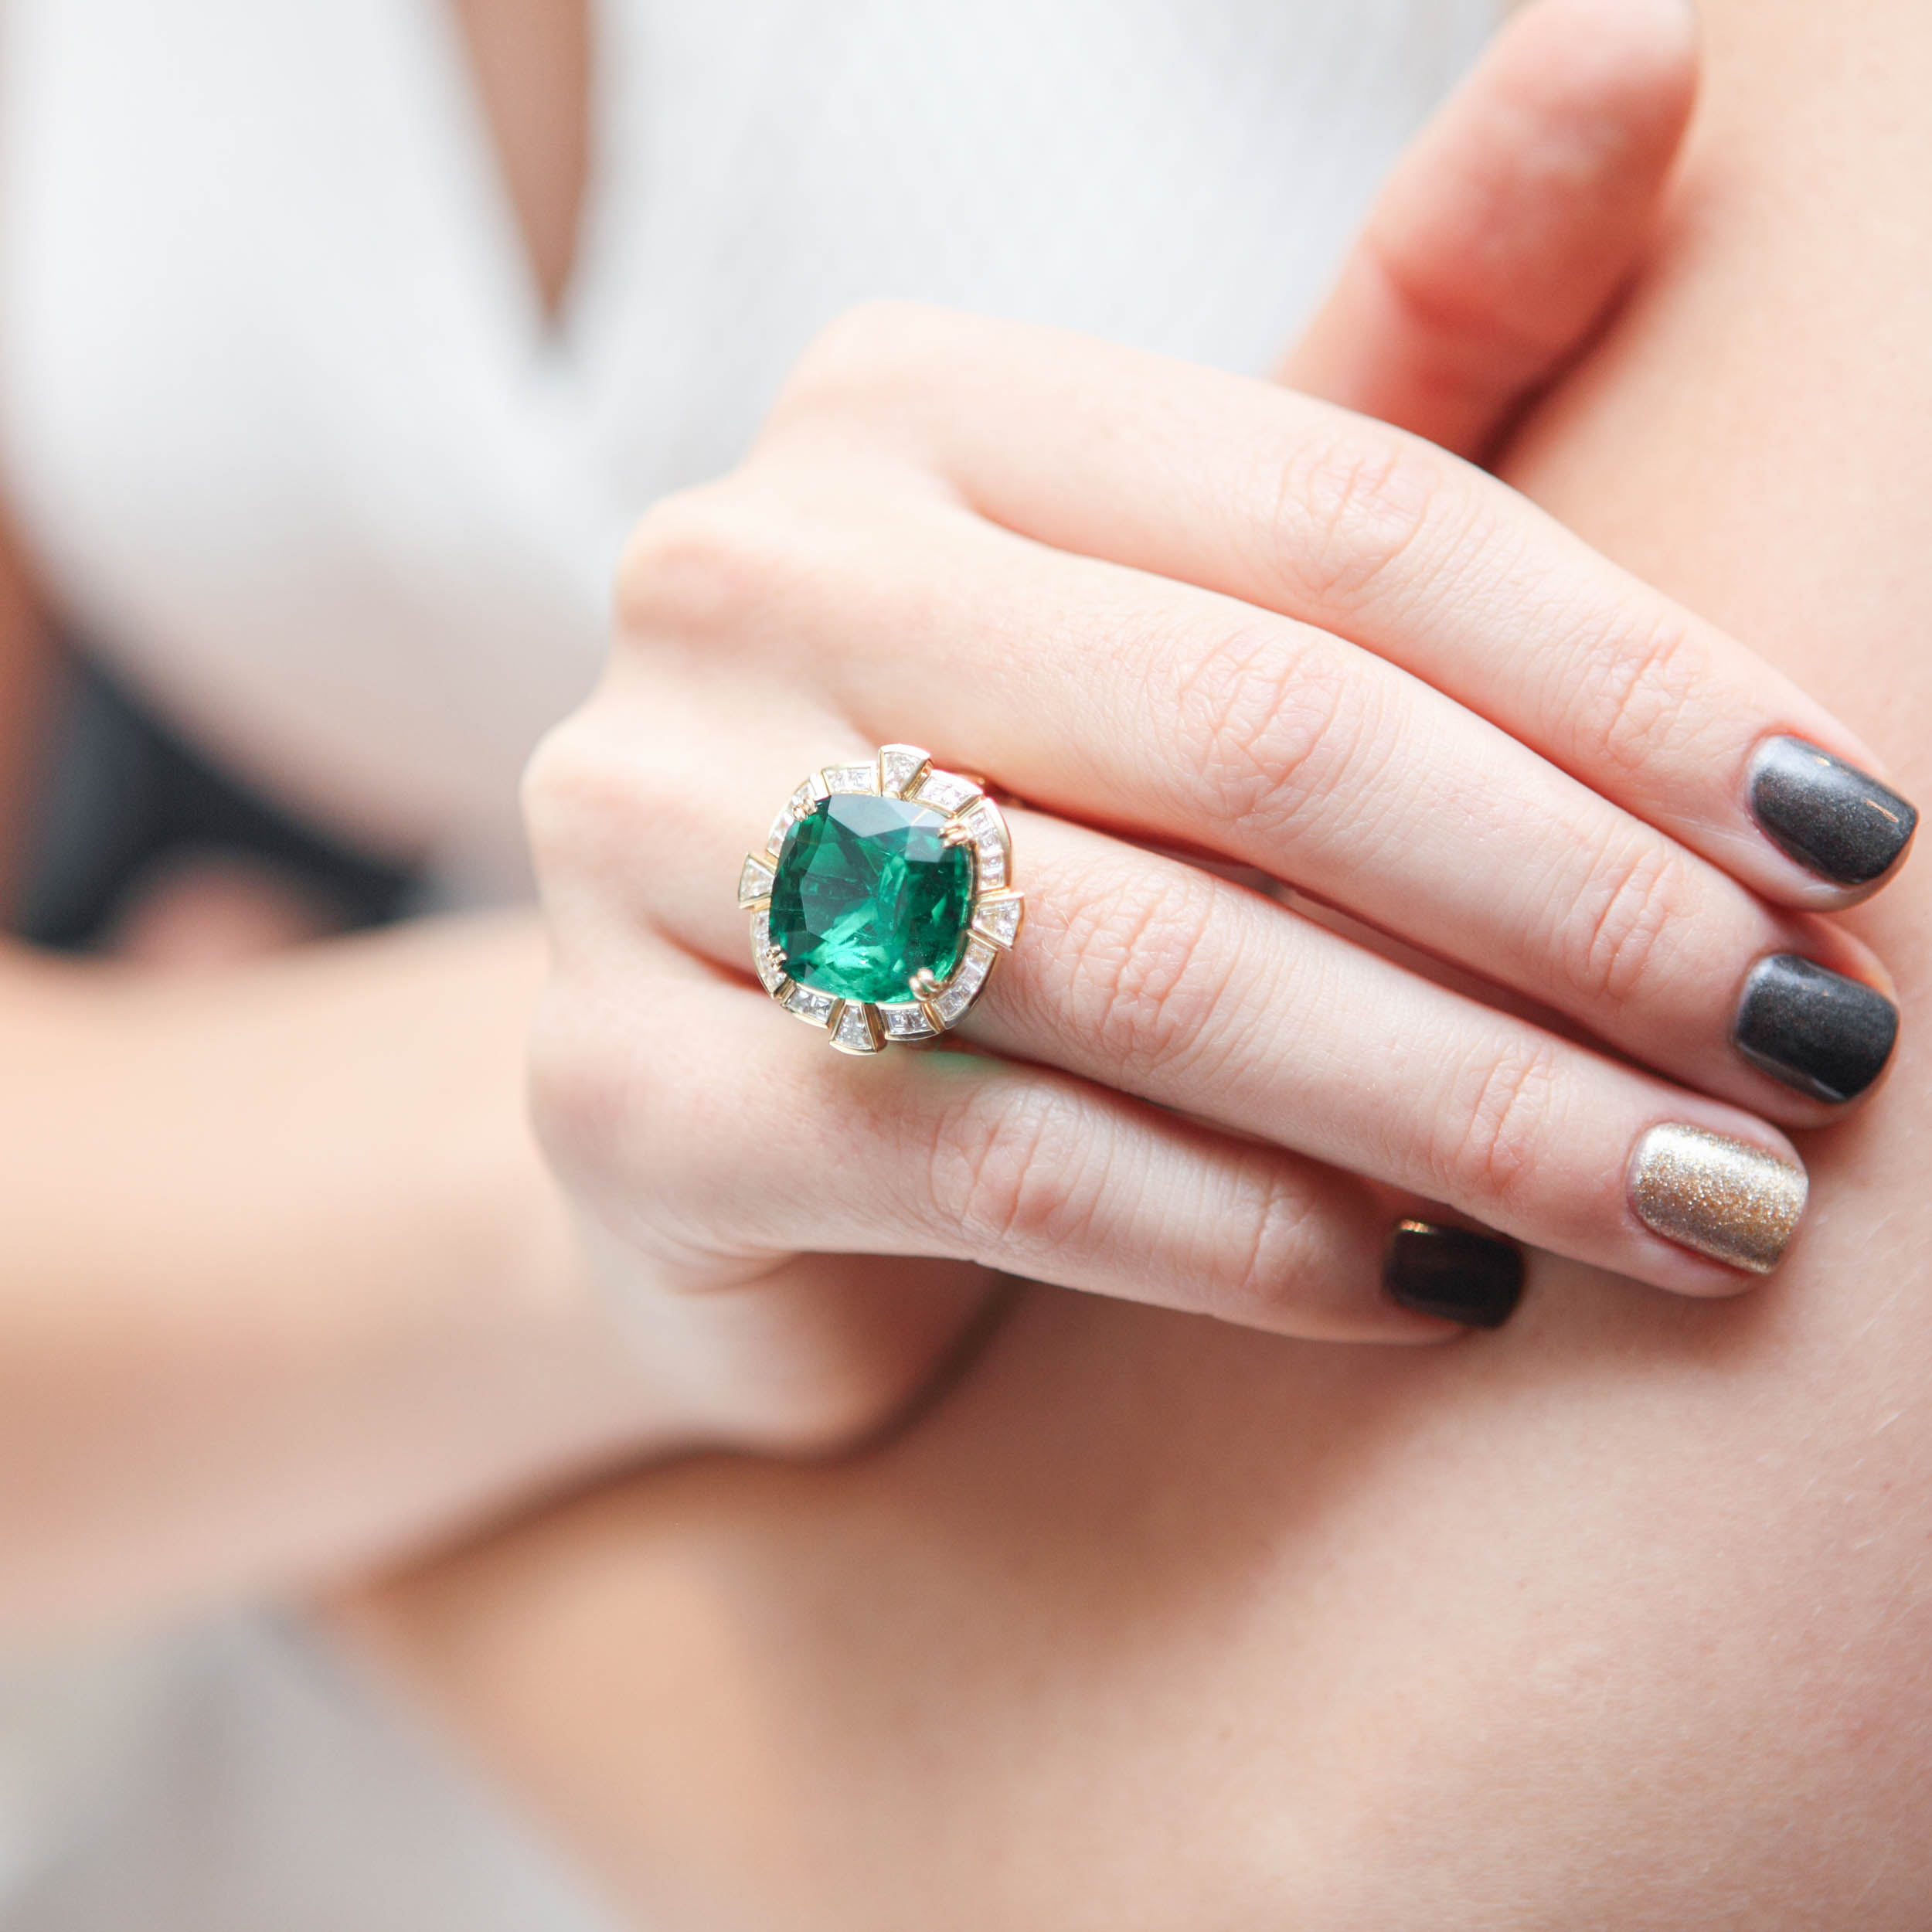 EVERYTHING YOU NEED TO KNOW ABOUT EMERALDS